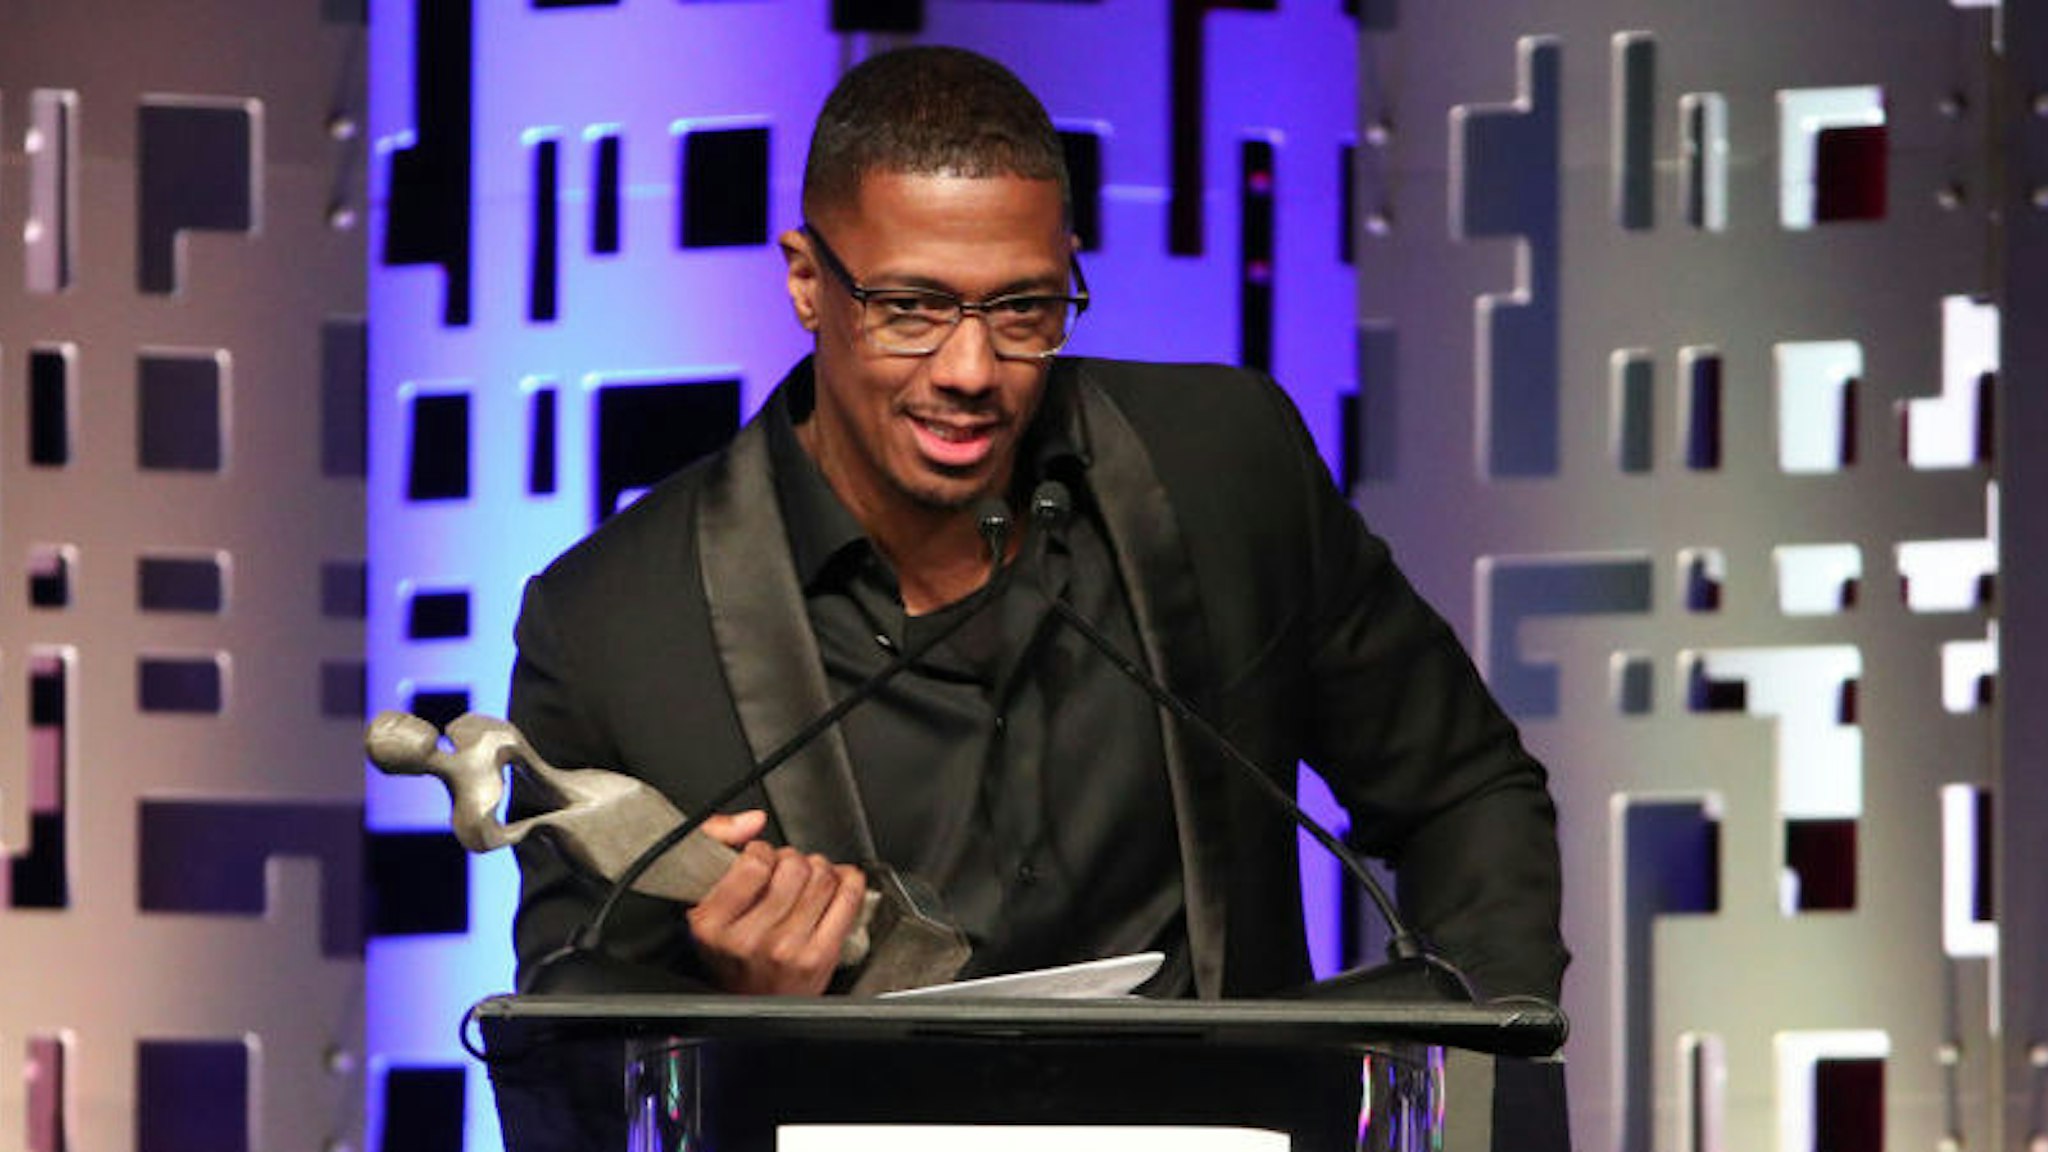 Host Nick Cannon accepts the Anne Douglas Award on behalf of Kevin and Eniko Hart onstage at The Los Angeles Mission Legacy Of Vision Gala at The Beverly Hilton Hotel on October 24, 2019 in Beverly Hills, California. (Photo by Rich Fury/Getty Images)